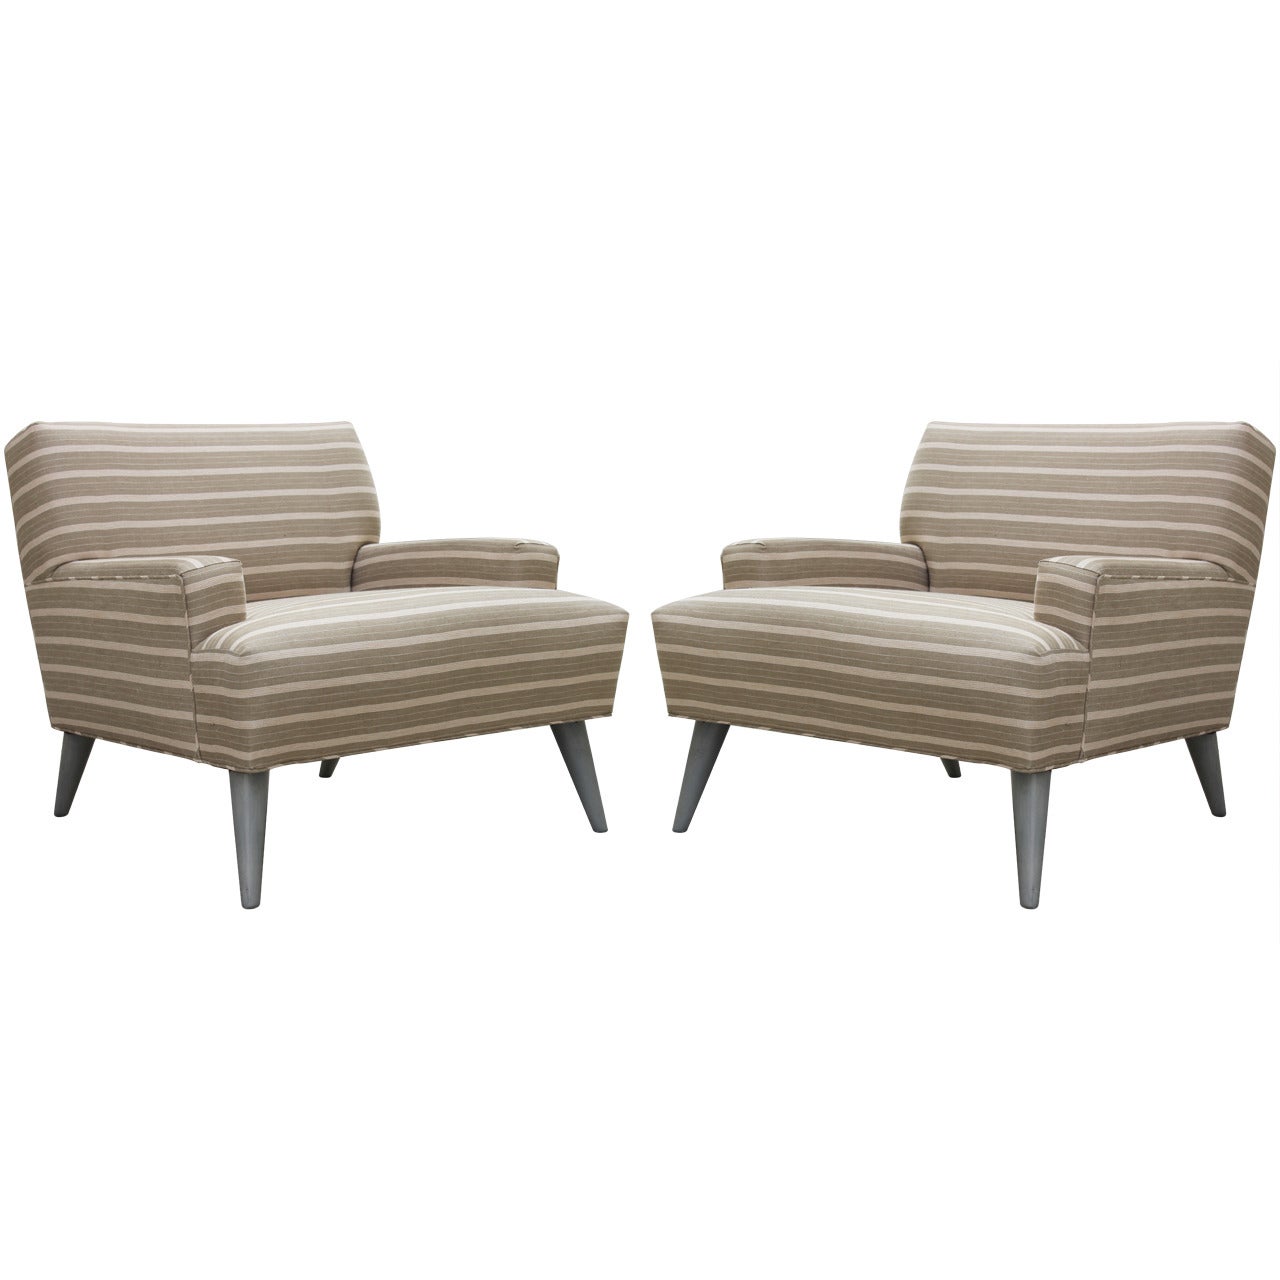 Pair of  Linen  Club Chairs